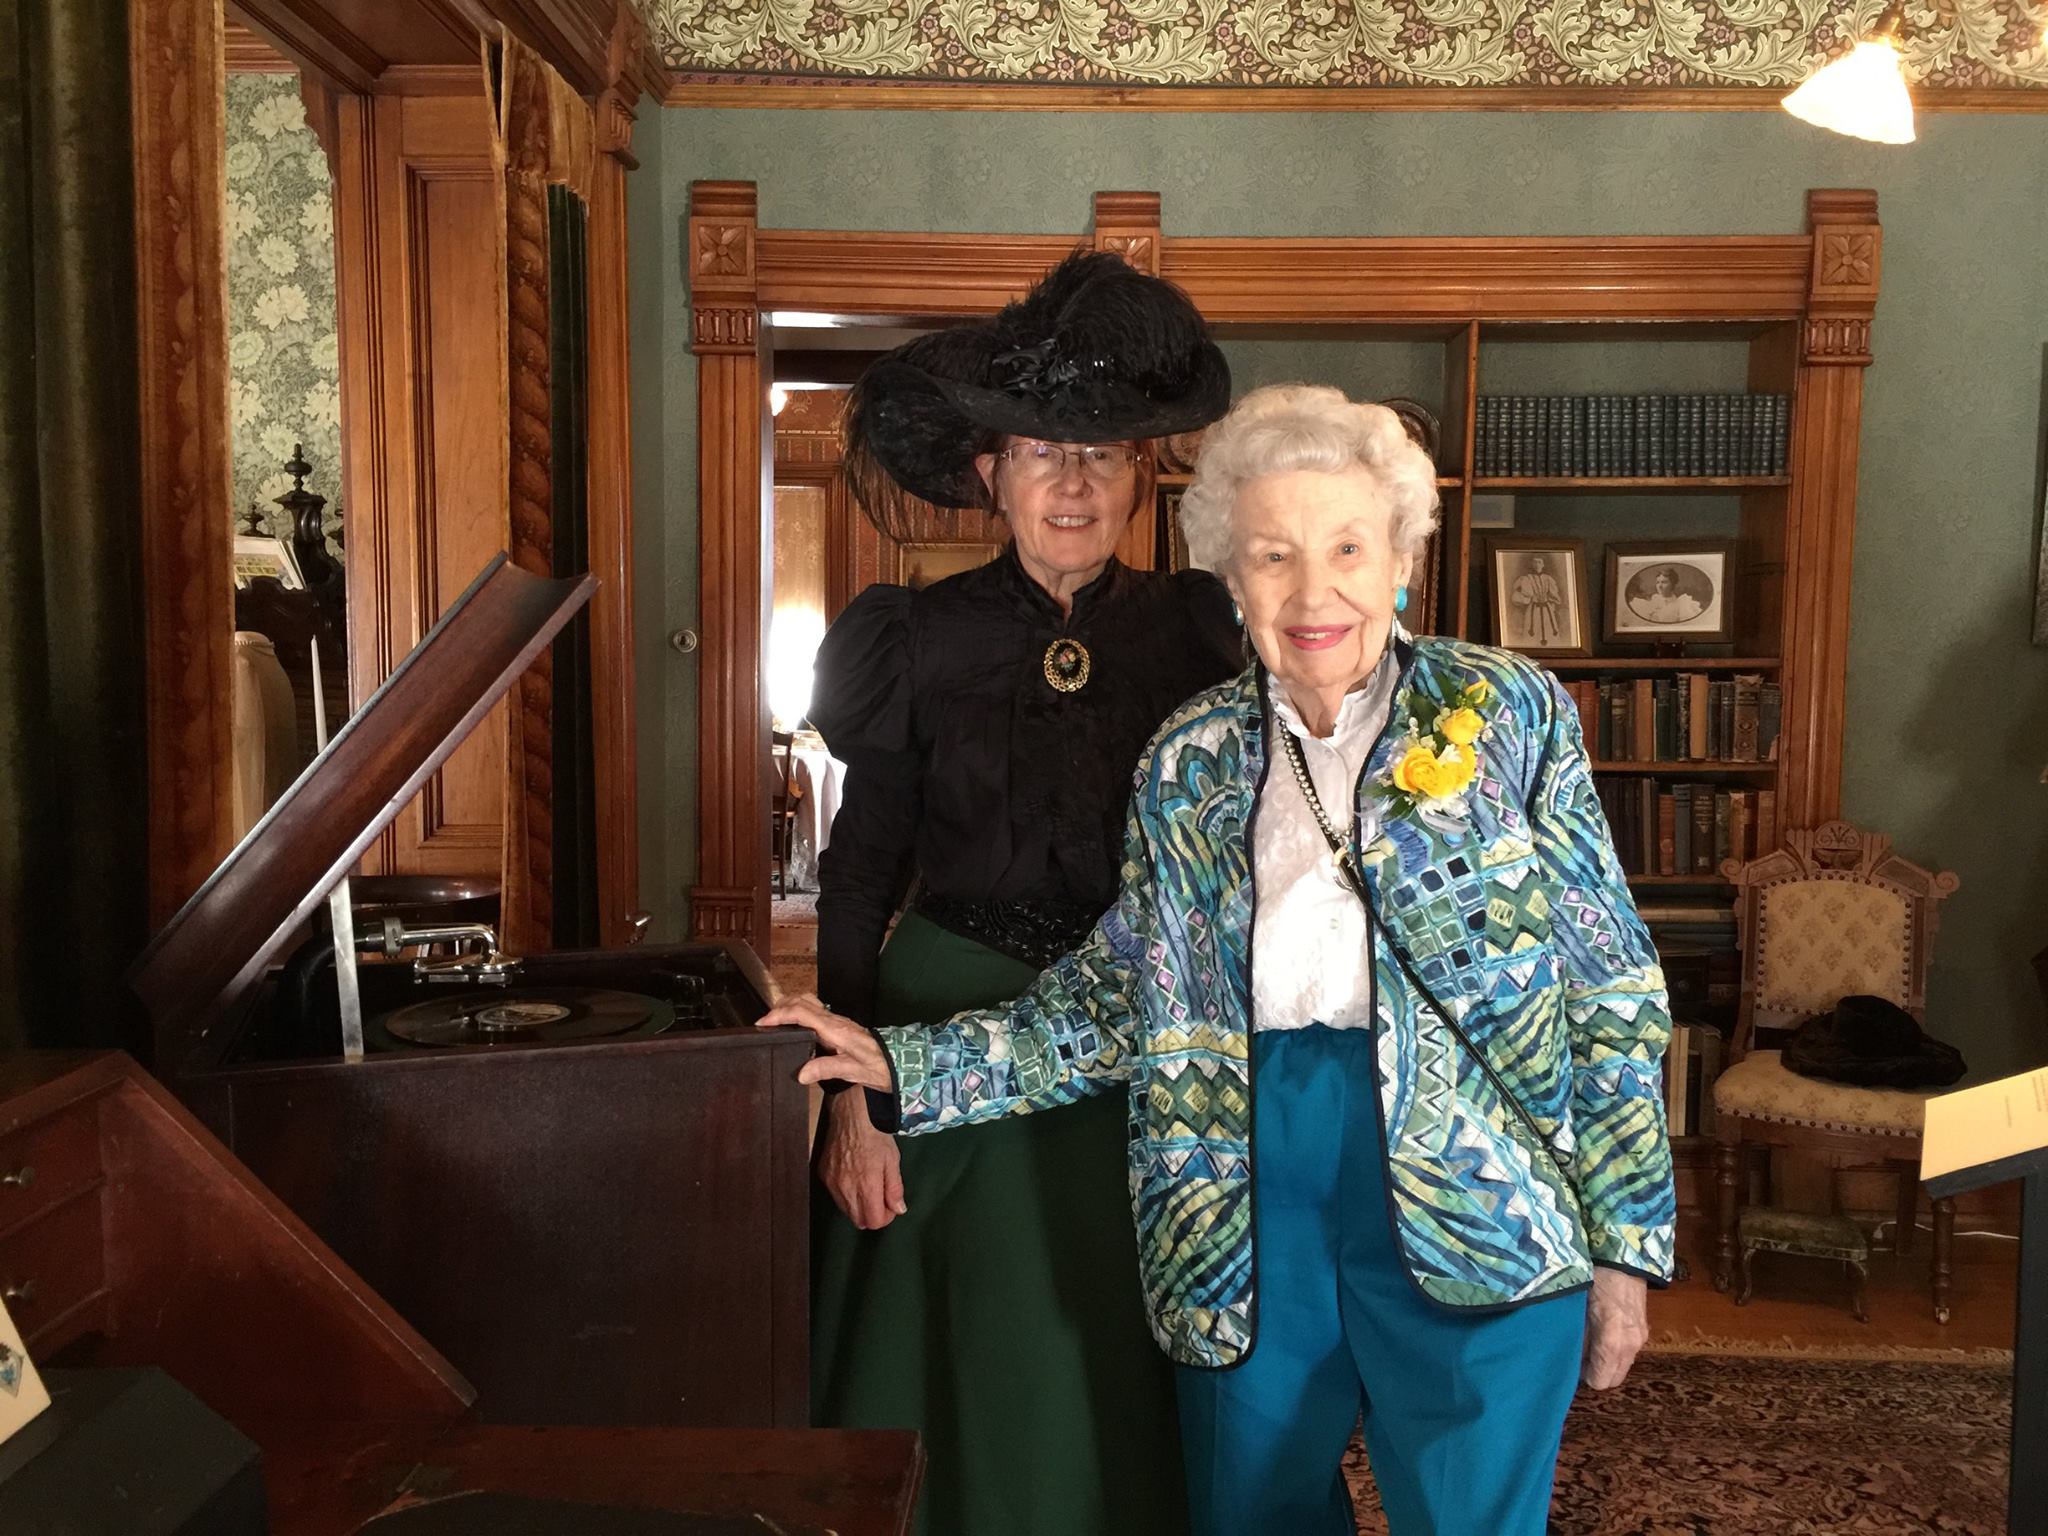   Avery House docent Karol Harding (l.) poses with Margaret Brown (r.) during Margaret's tour of the Margaret Brown Collection exhibit at the Avery House.  